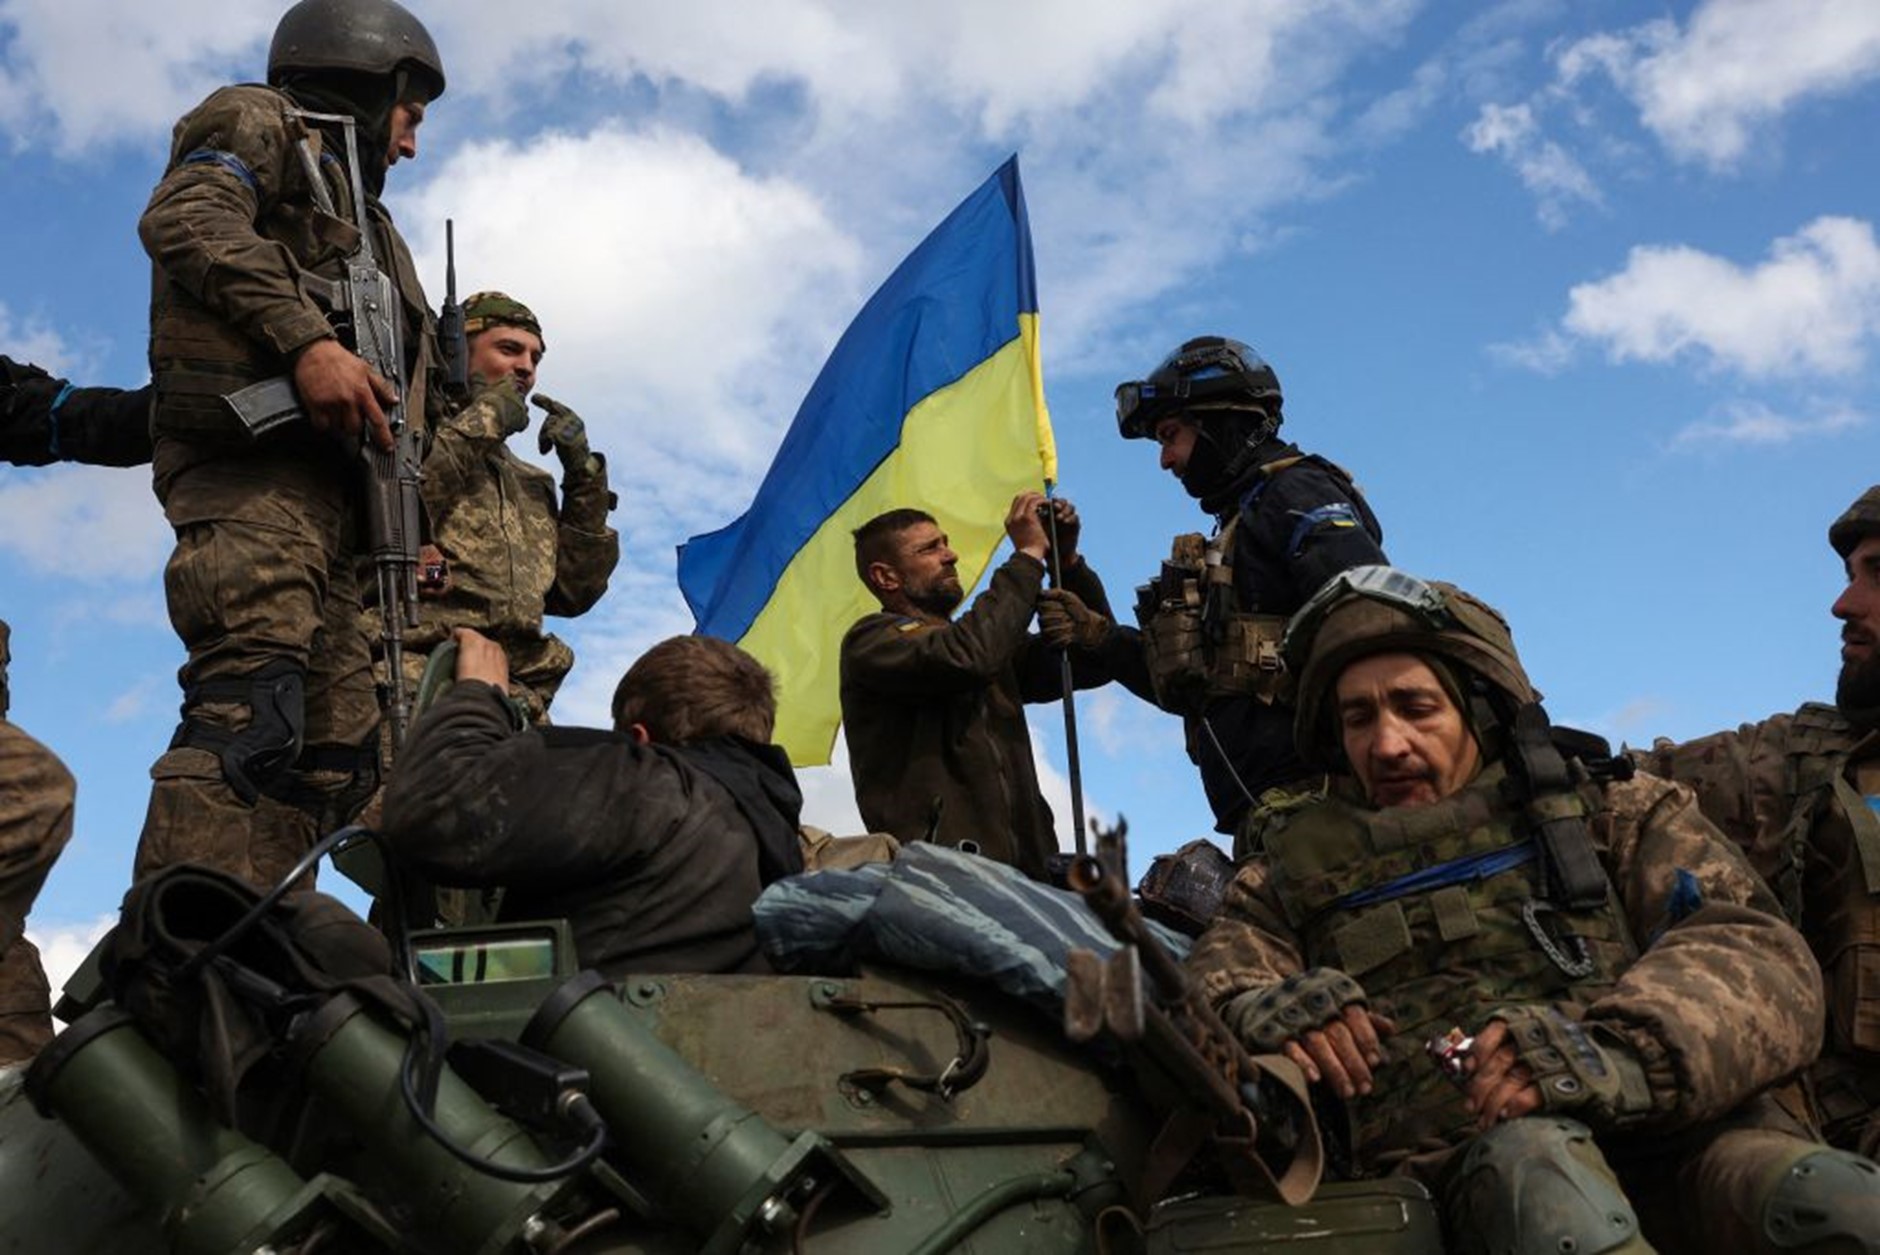 Ukraine’s Offensive: Is This The Last-Ditch Battle?